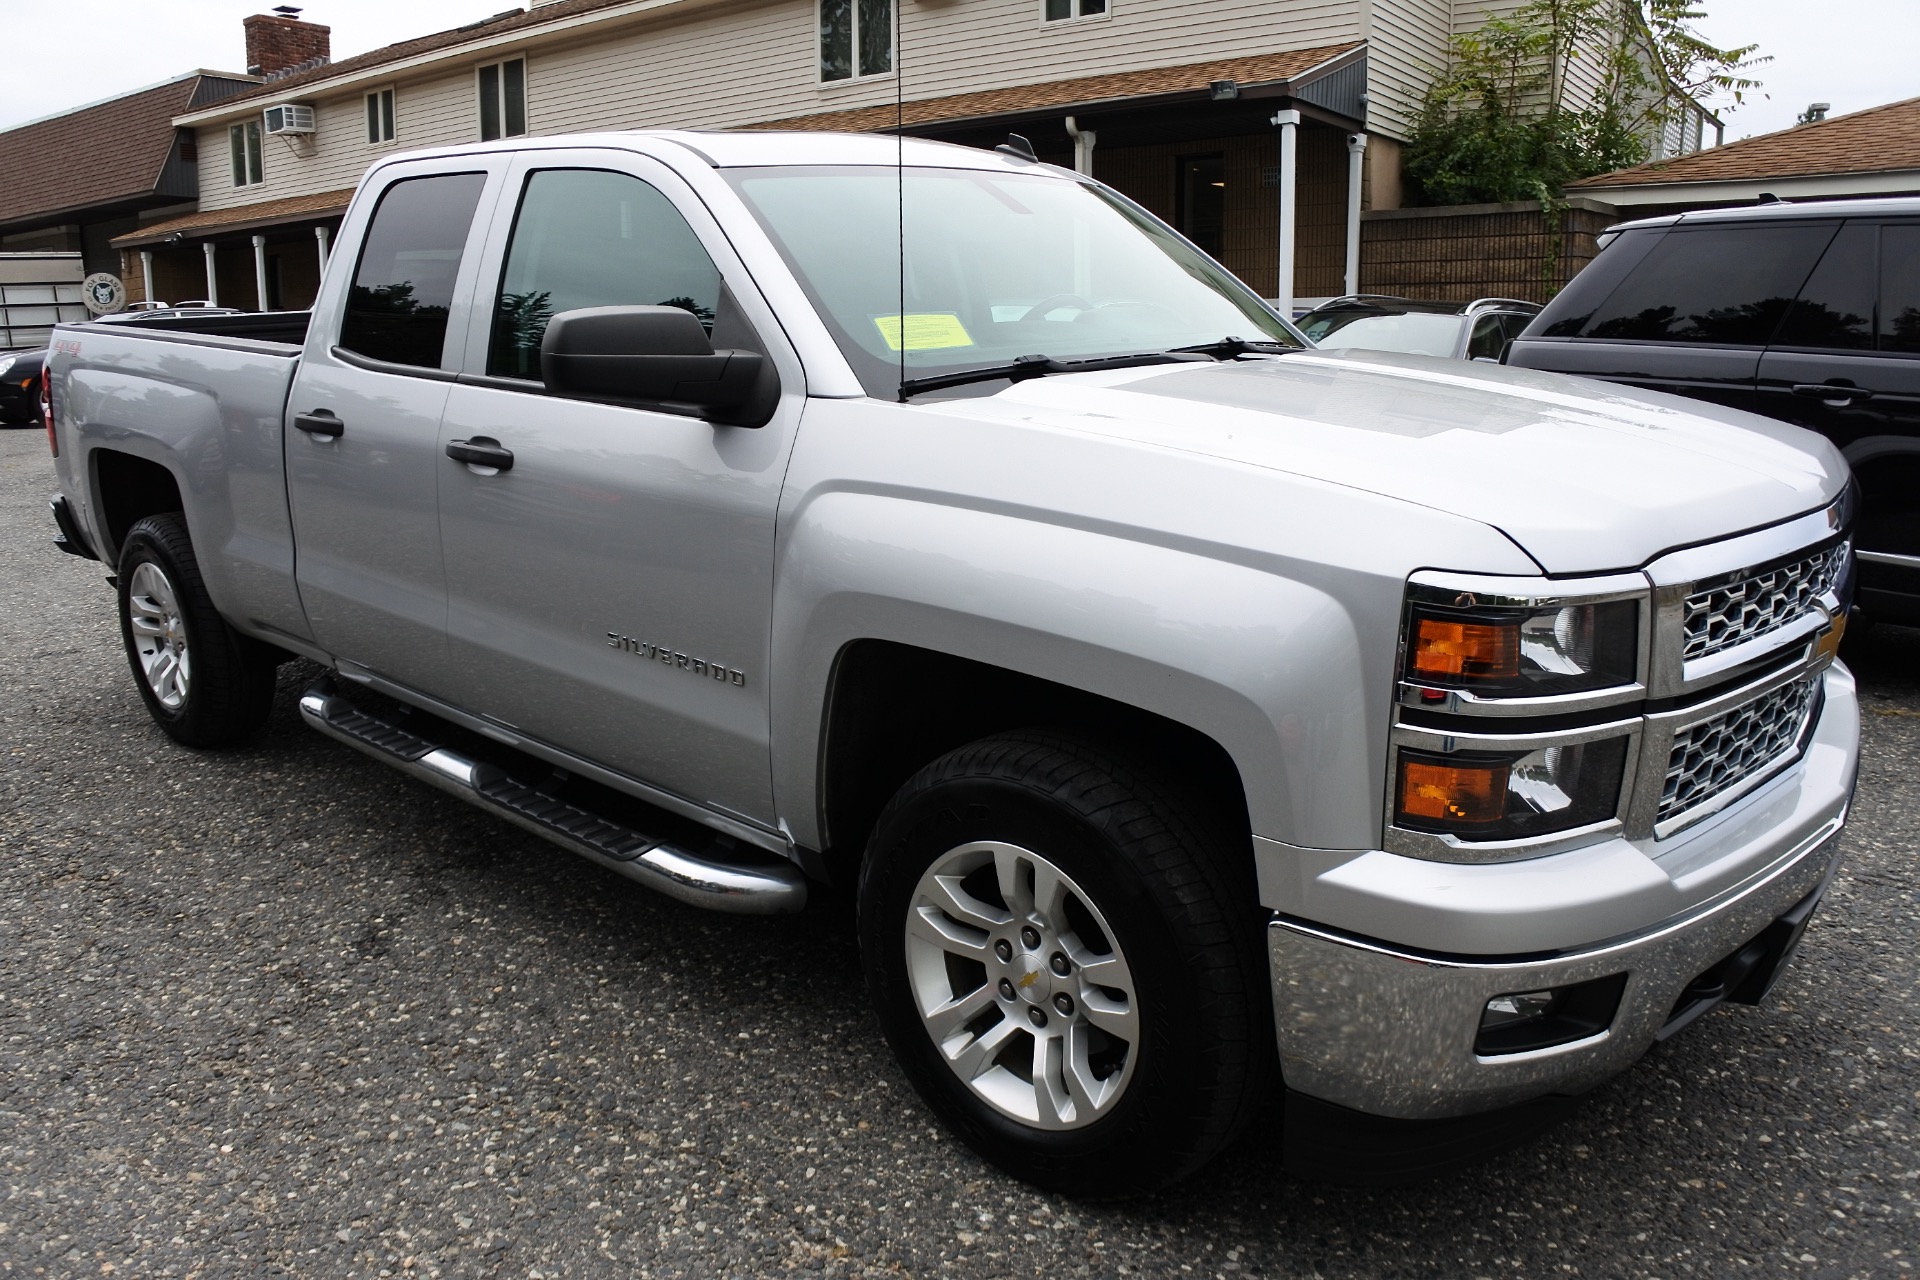 Used Chevy Silverado For Sale With Sunroof